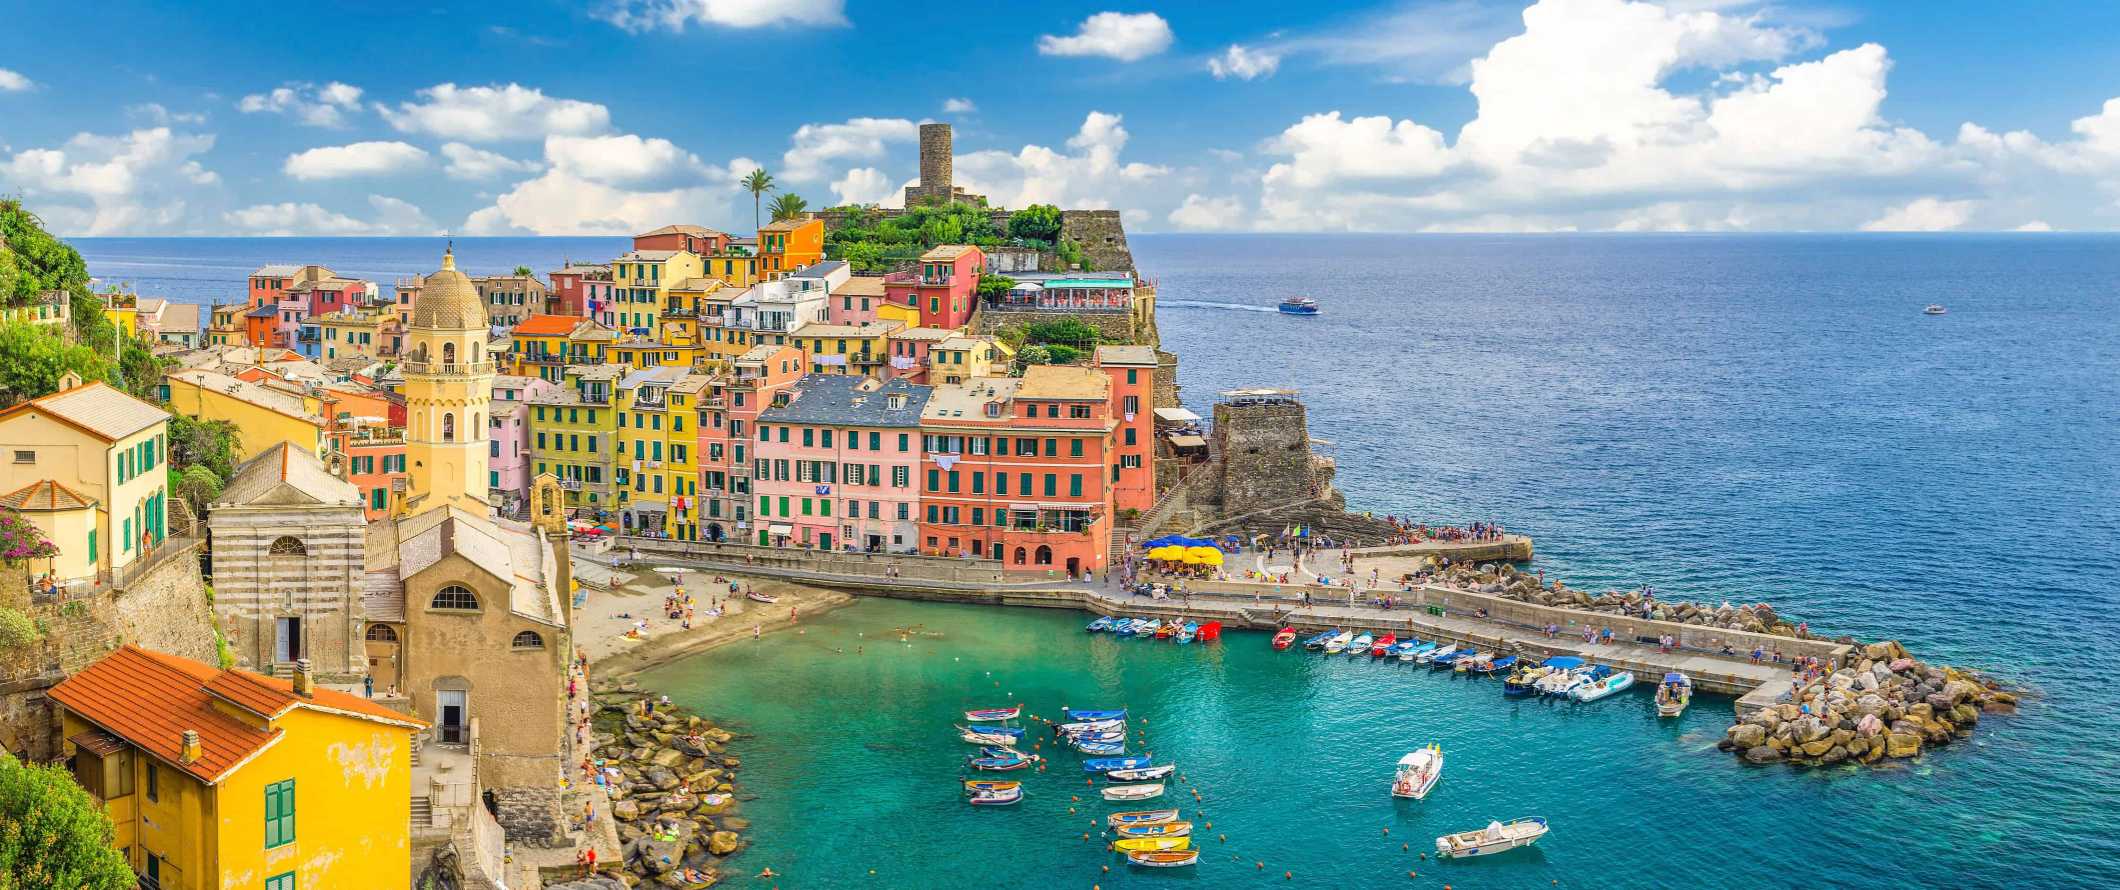 Colorful buildings and harbor filled with boats in the town of Vernazza in the Cinque Terre, Italy.